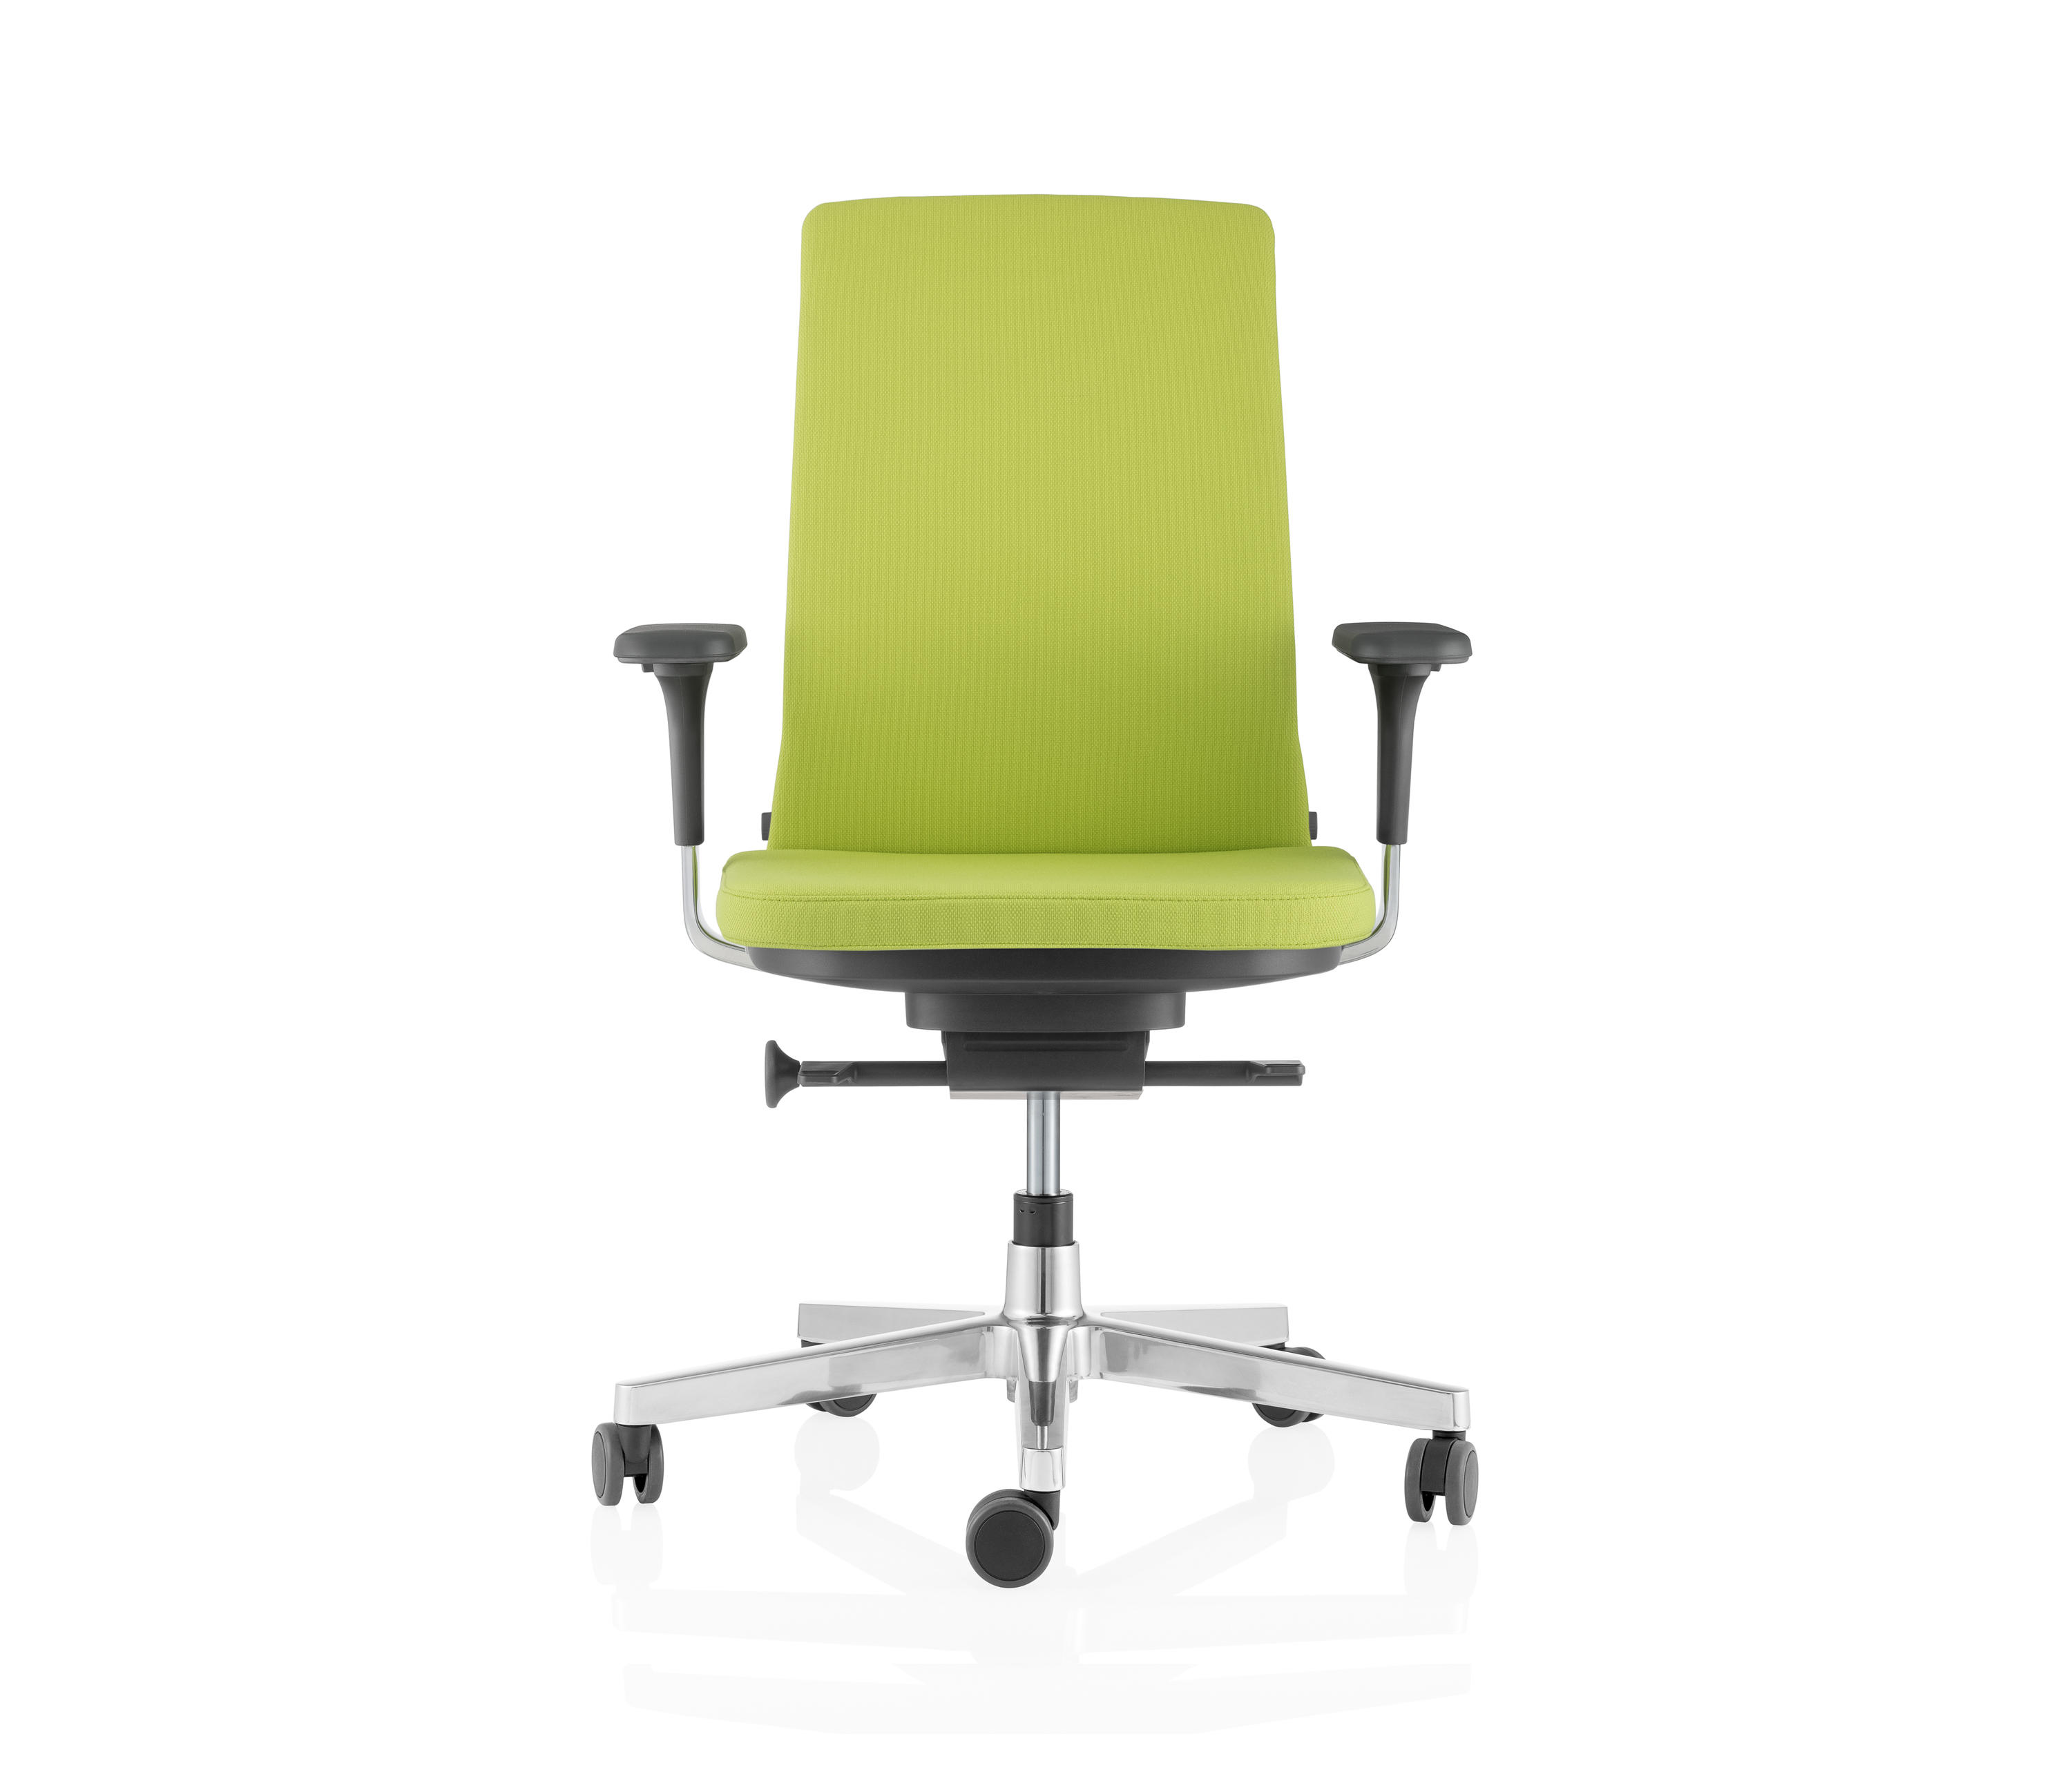 Pyla Tech Office Chairs From Icf Architonic